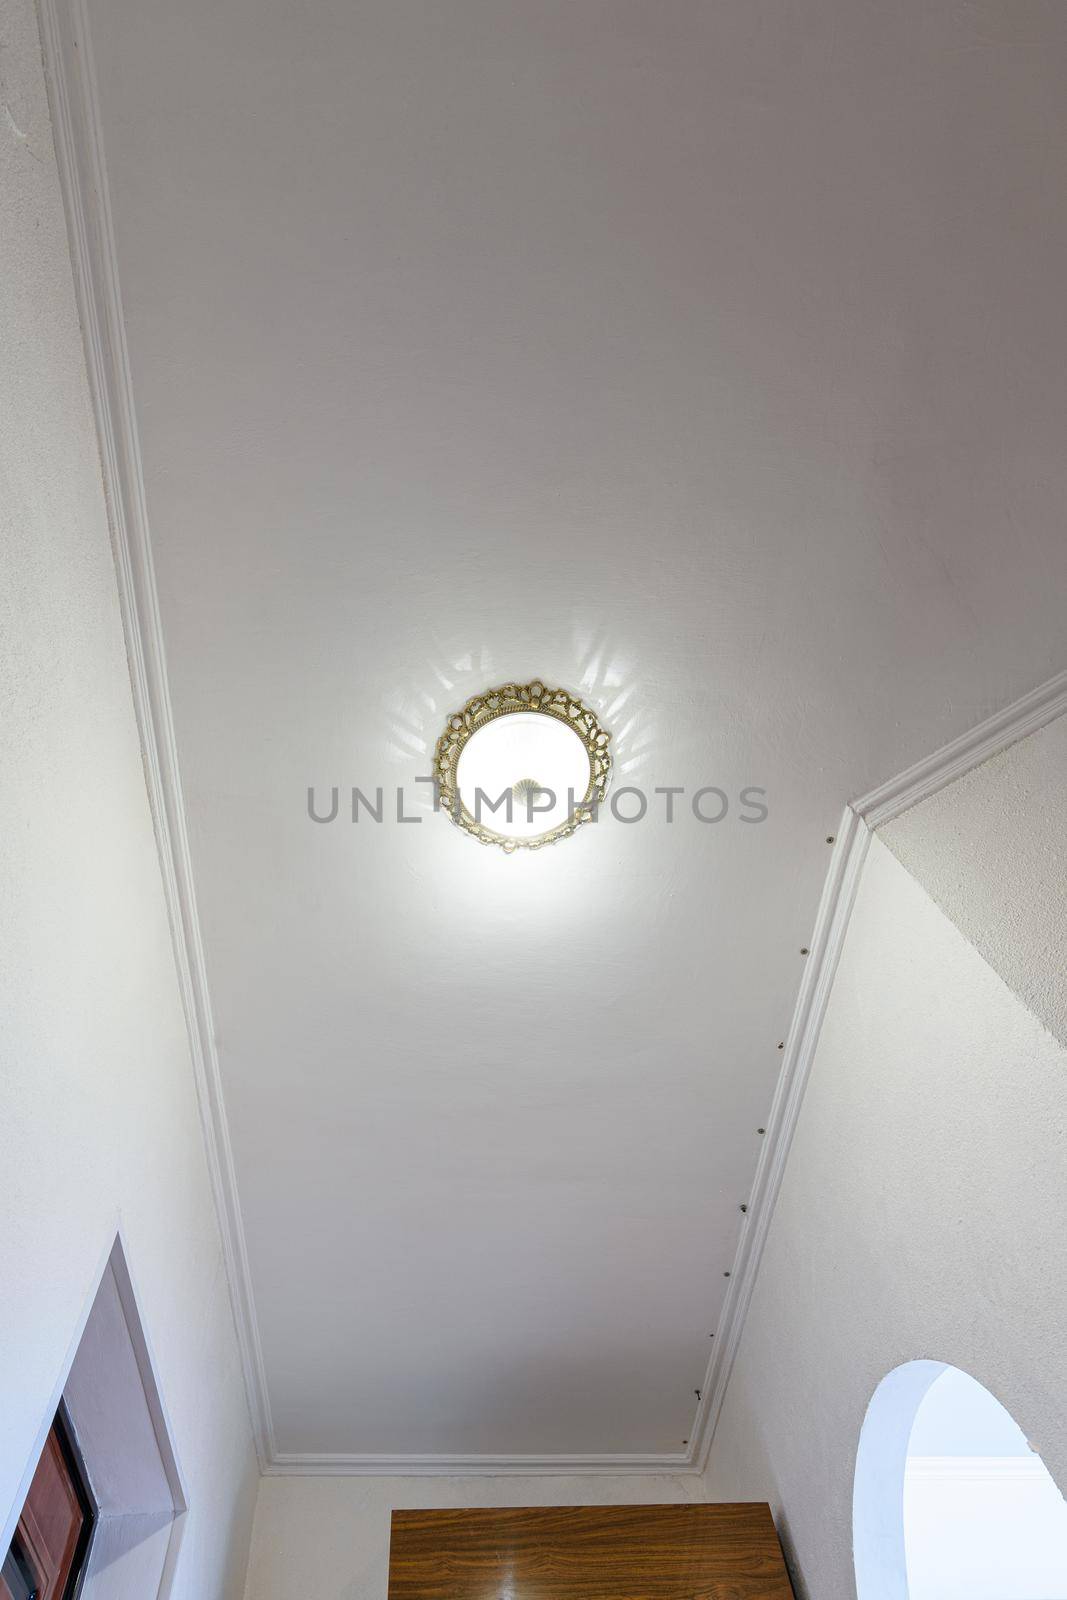 Plastered and white painted ceiling in the hallway